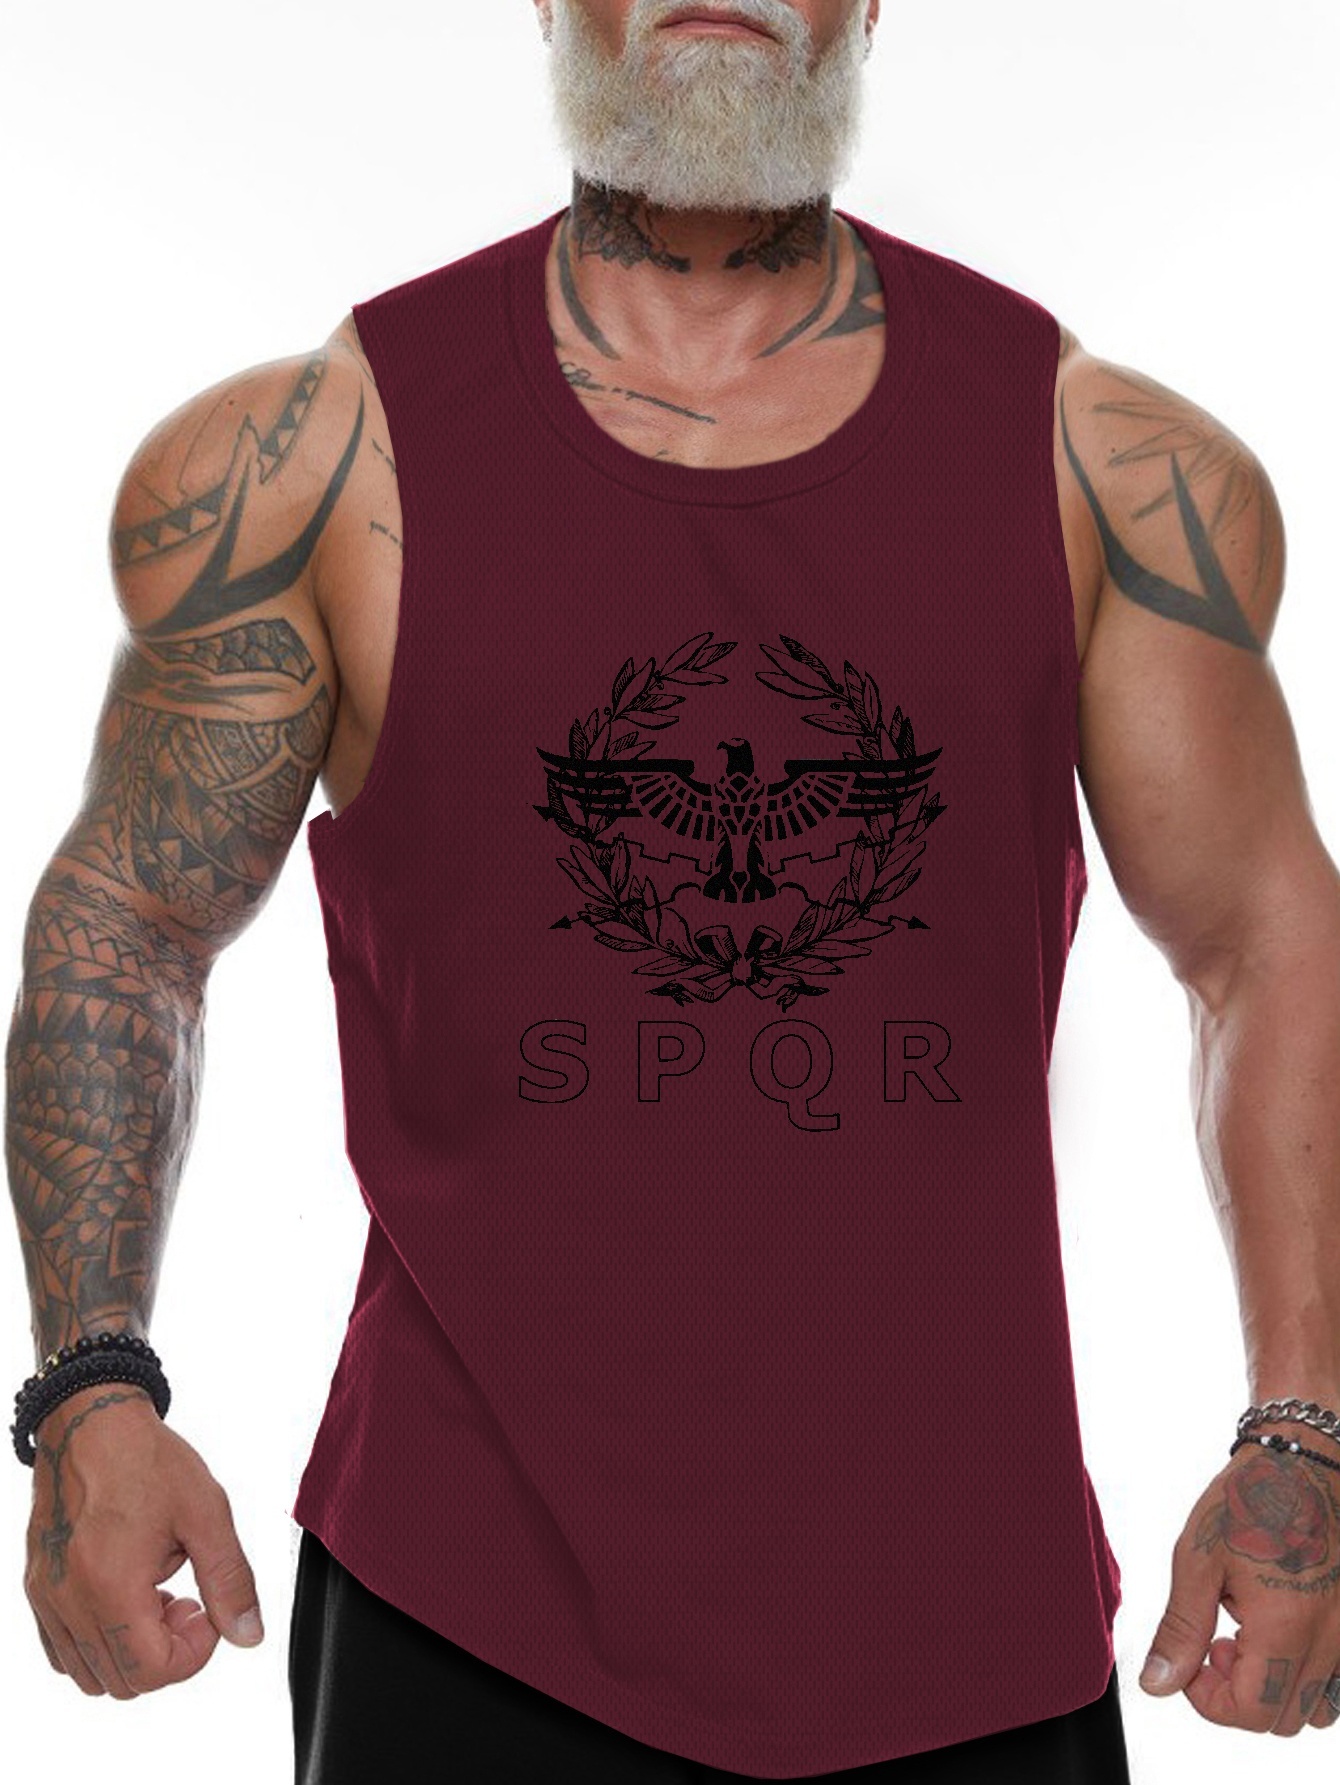 Men's Casual Plain Color Sleeveless Tank Tops, Summer Oversized Loose Vest  For Fitness, Workout, Training Plus Size